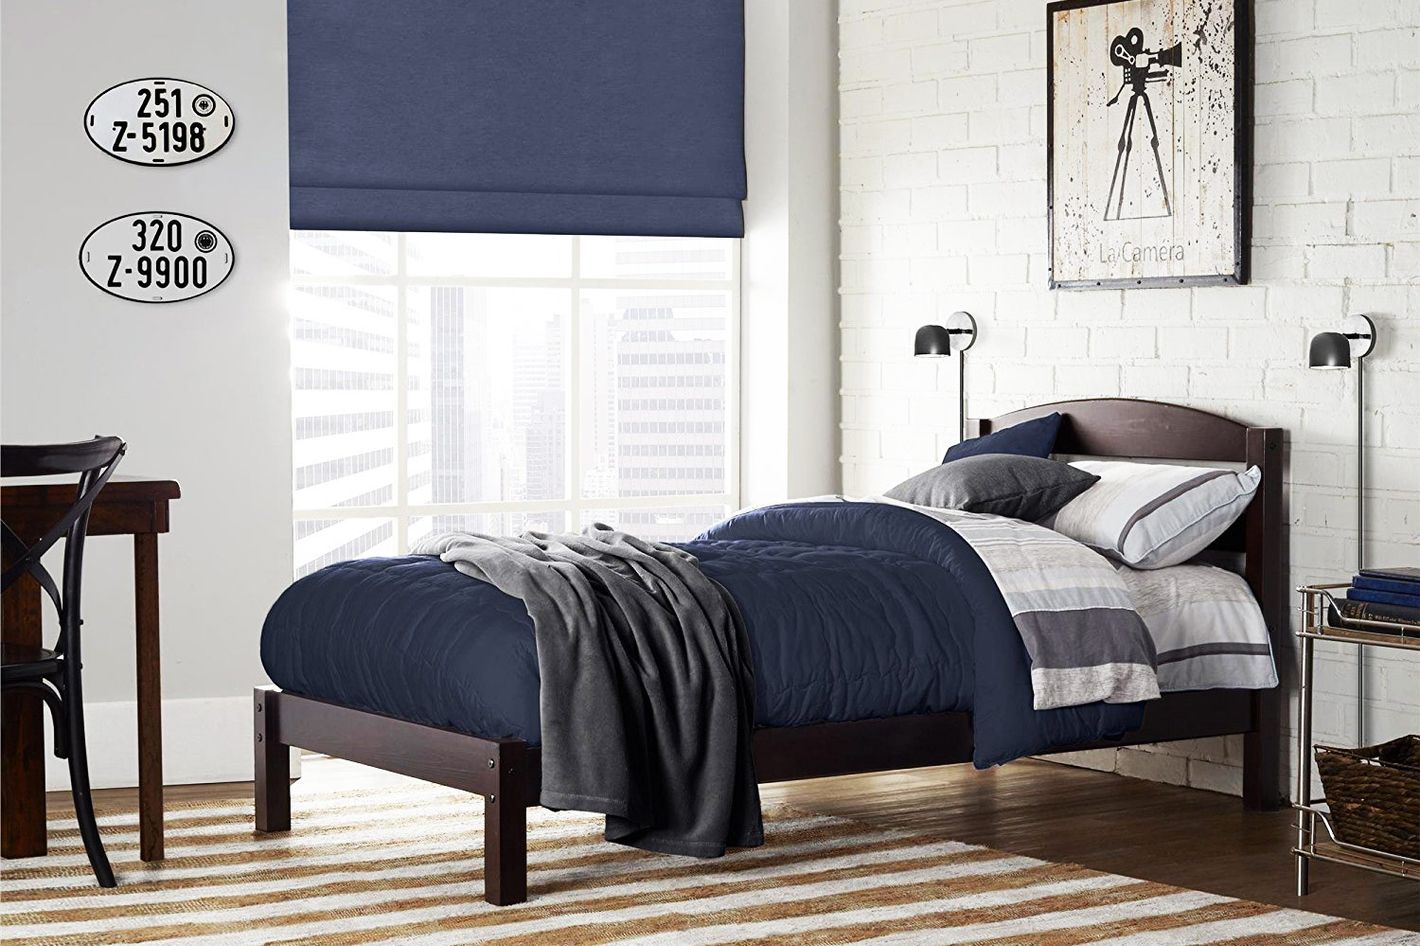 12 Best Twin Beds For Kids 2019, Twin Bed Frame Under $100